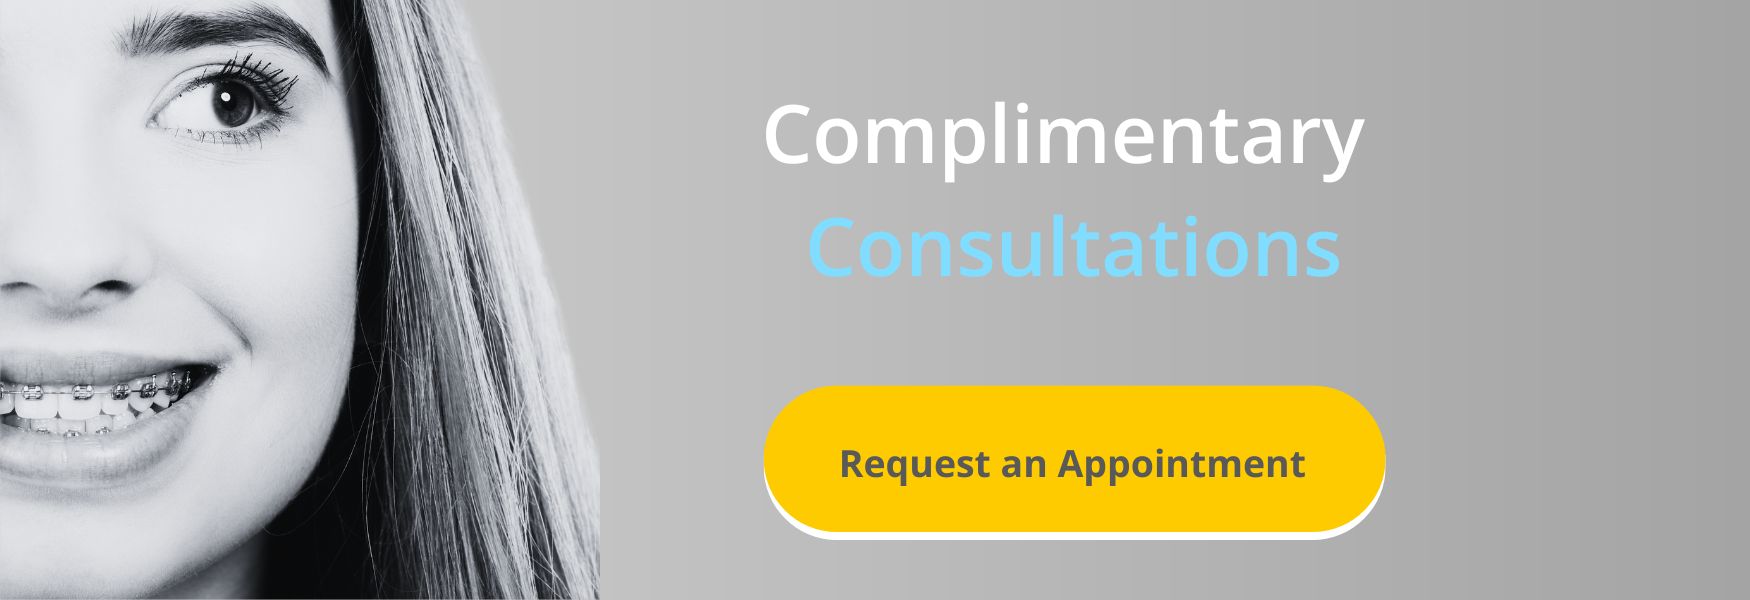 Complimentary Orthodontic Consultations in Green Bay. Click to Request an Appointment